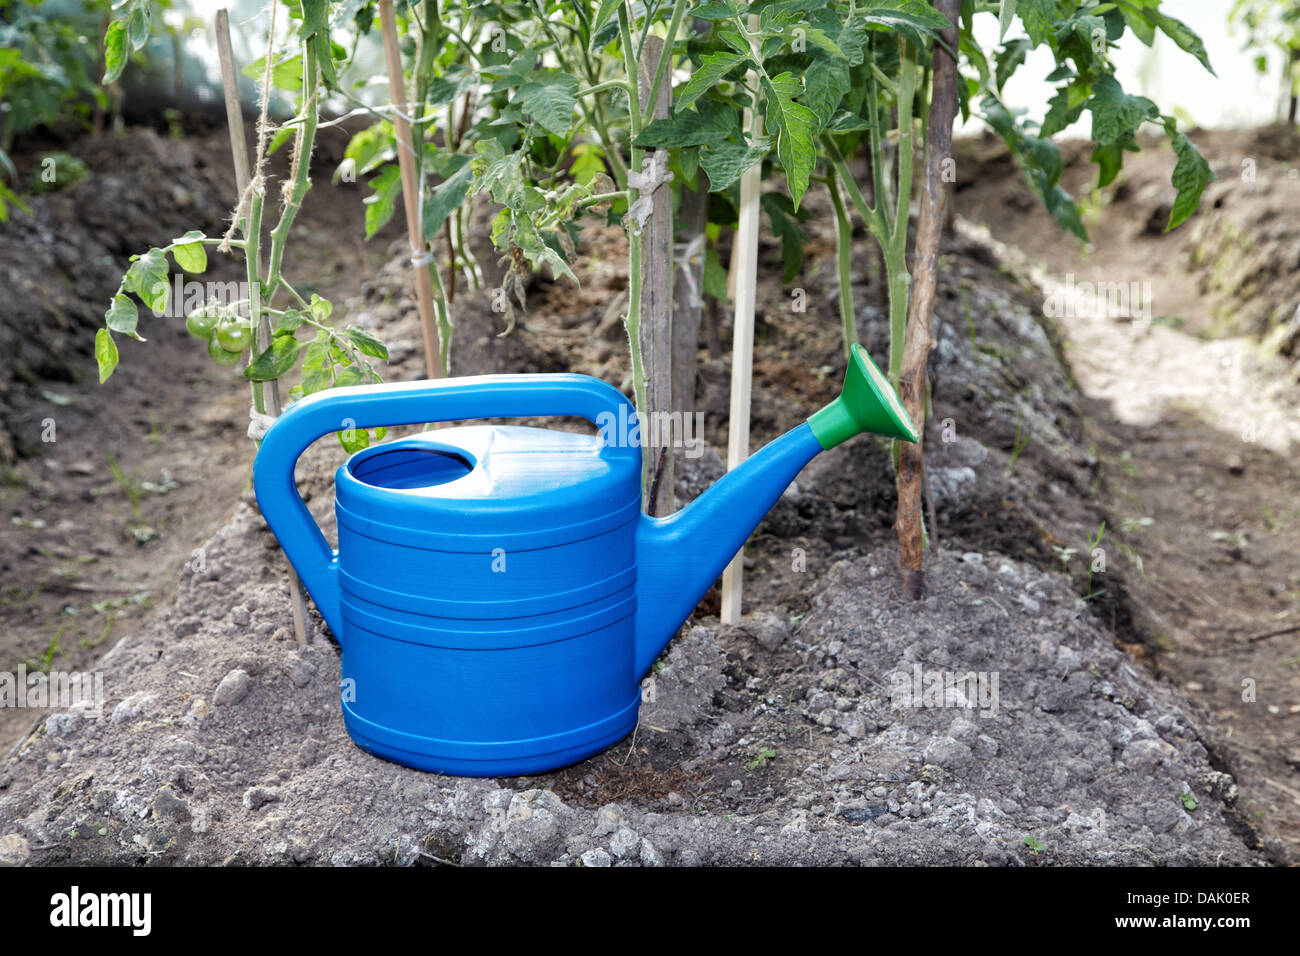 Watering can in a hothouse with tomatoes Stock Photo